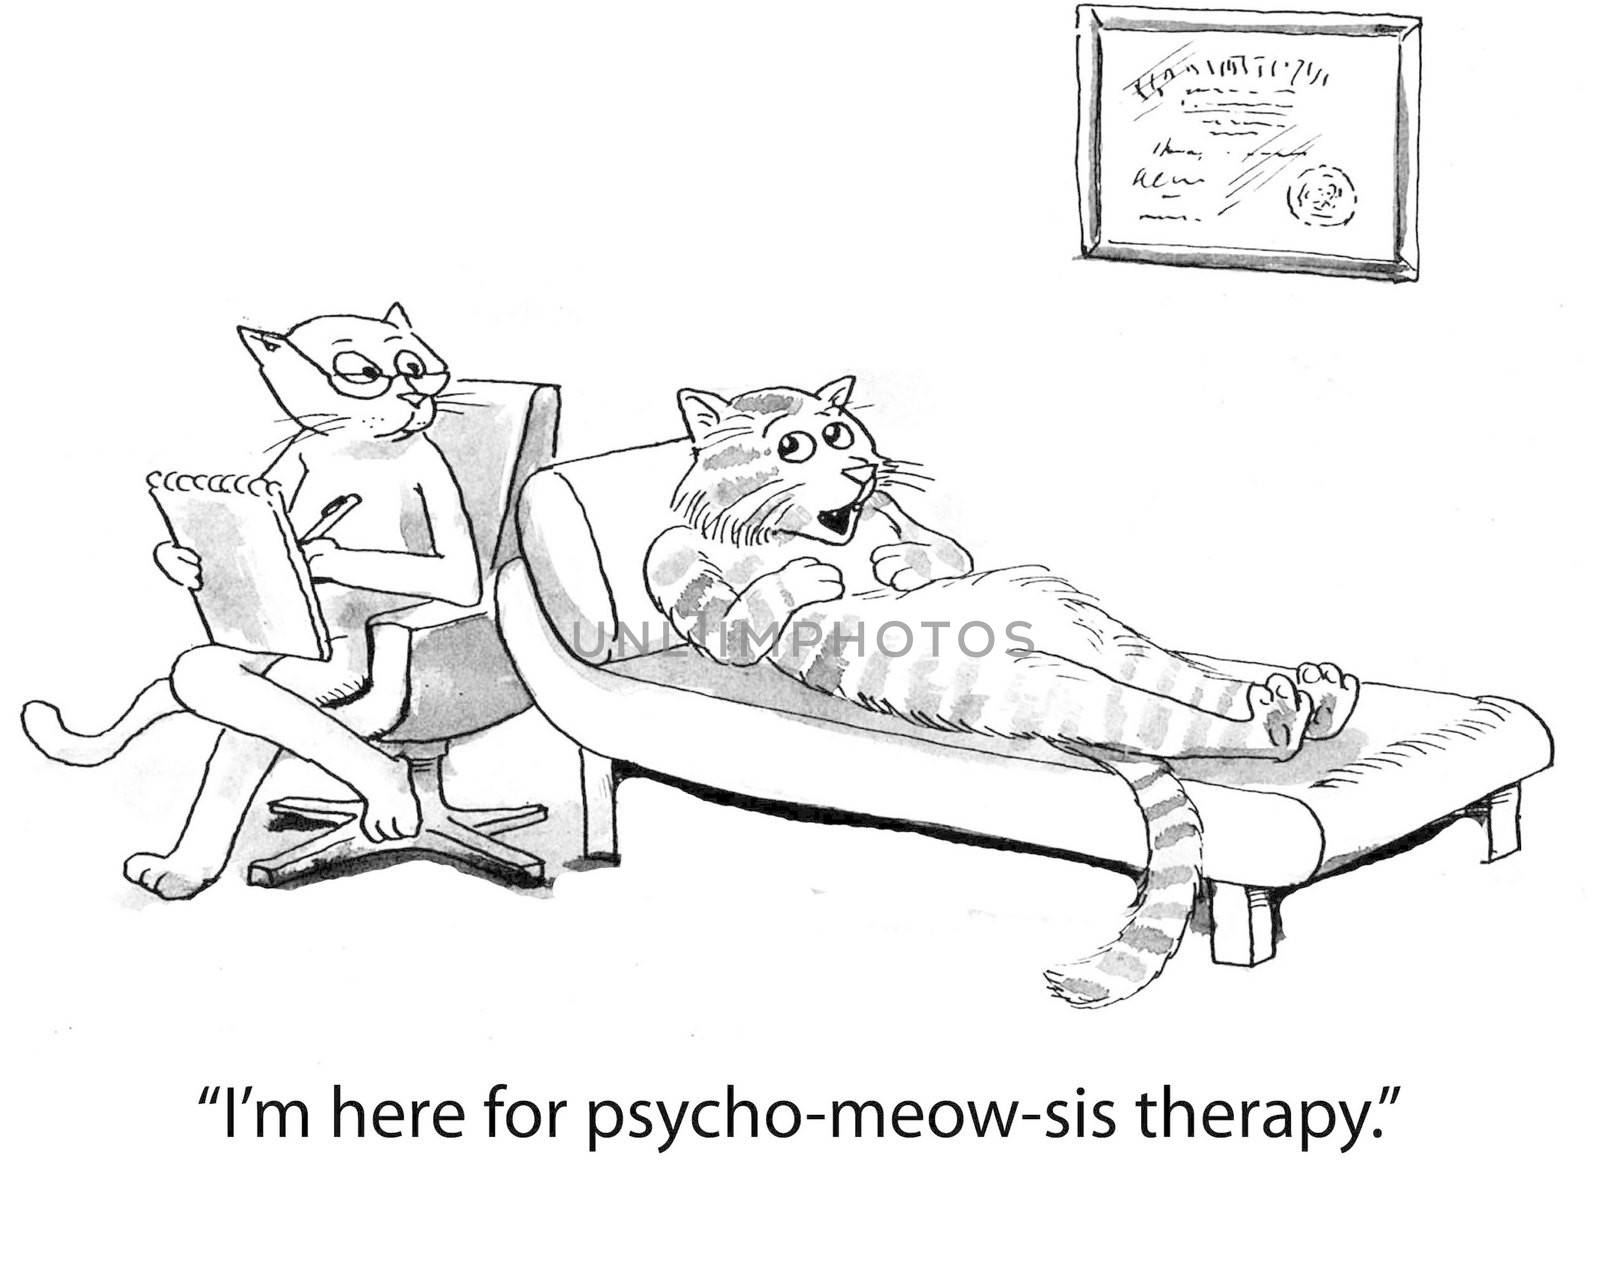 "I'm here for psycho-meow-sis therapy."